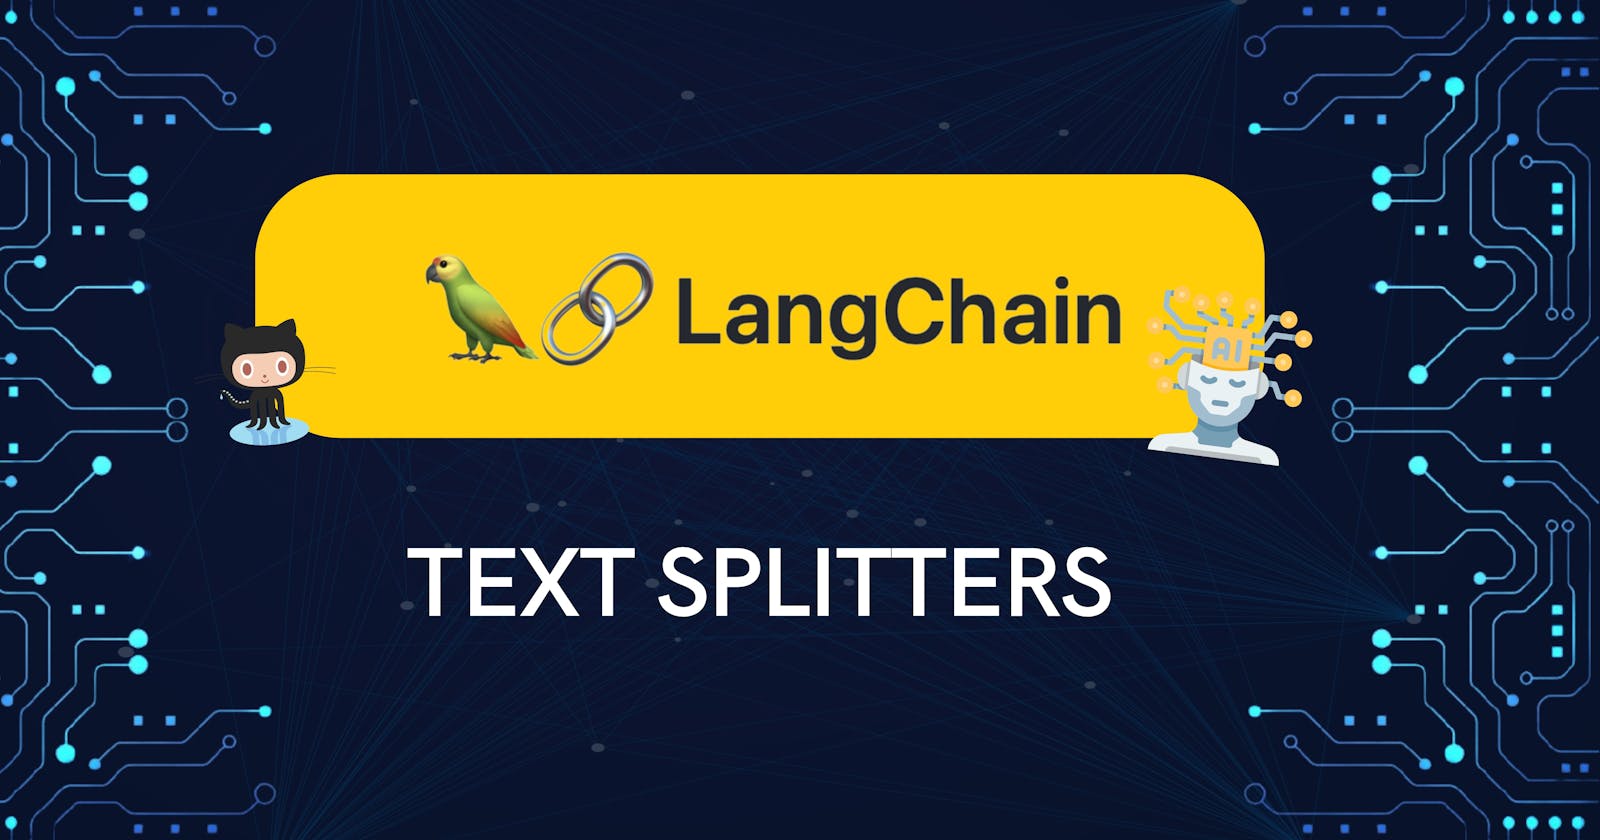 The ultimate LangChain series — text splitters